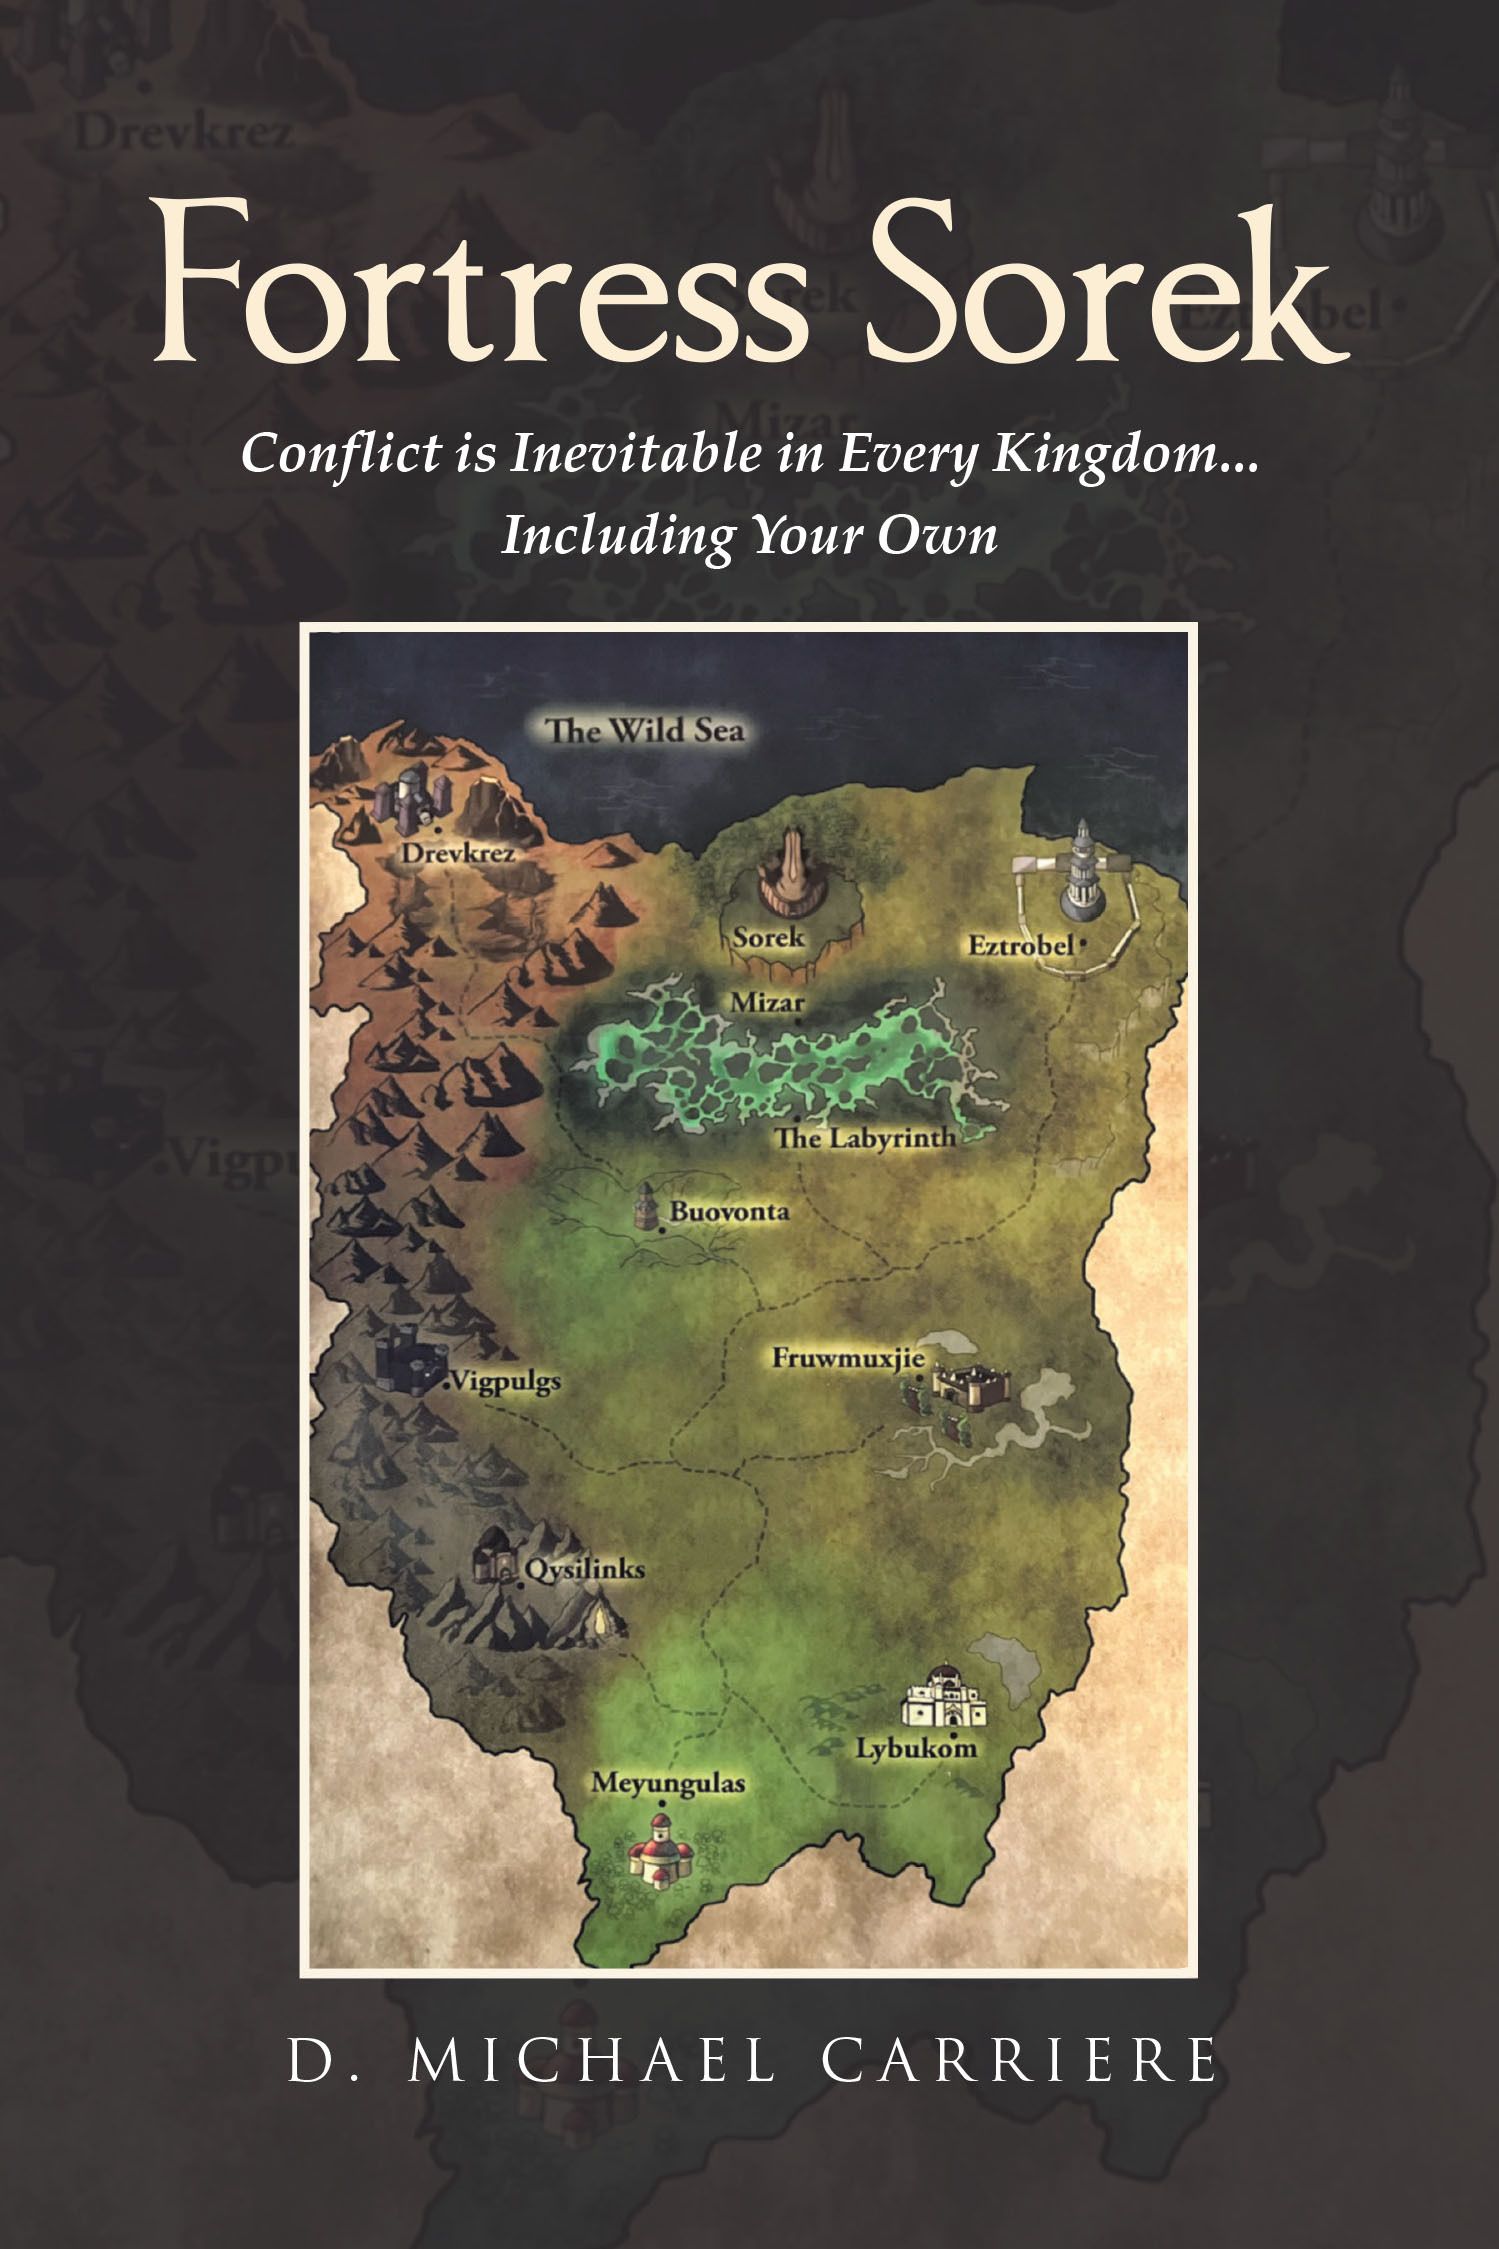 Author D. Michael Carriere’s New Book, “Fortress Sorek: Conflict is Inevitable in Every Kingdom...Including Your Own,” is a Tale of Courage, Sacrifice, and Redemption